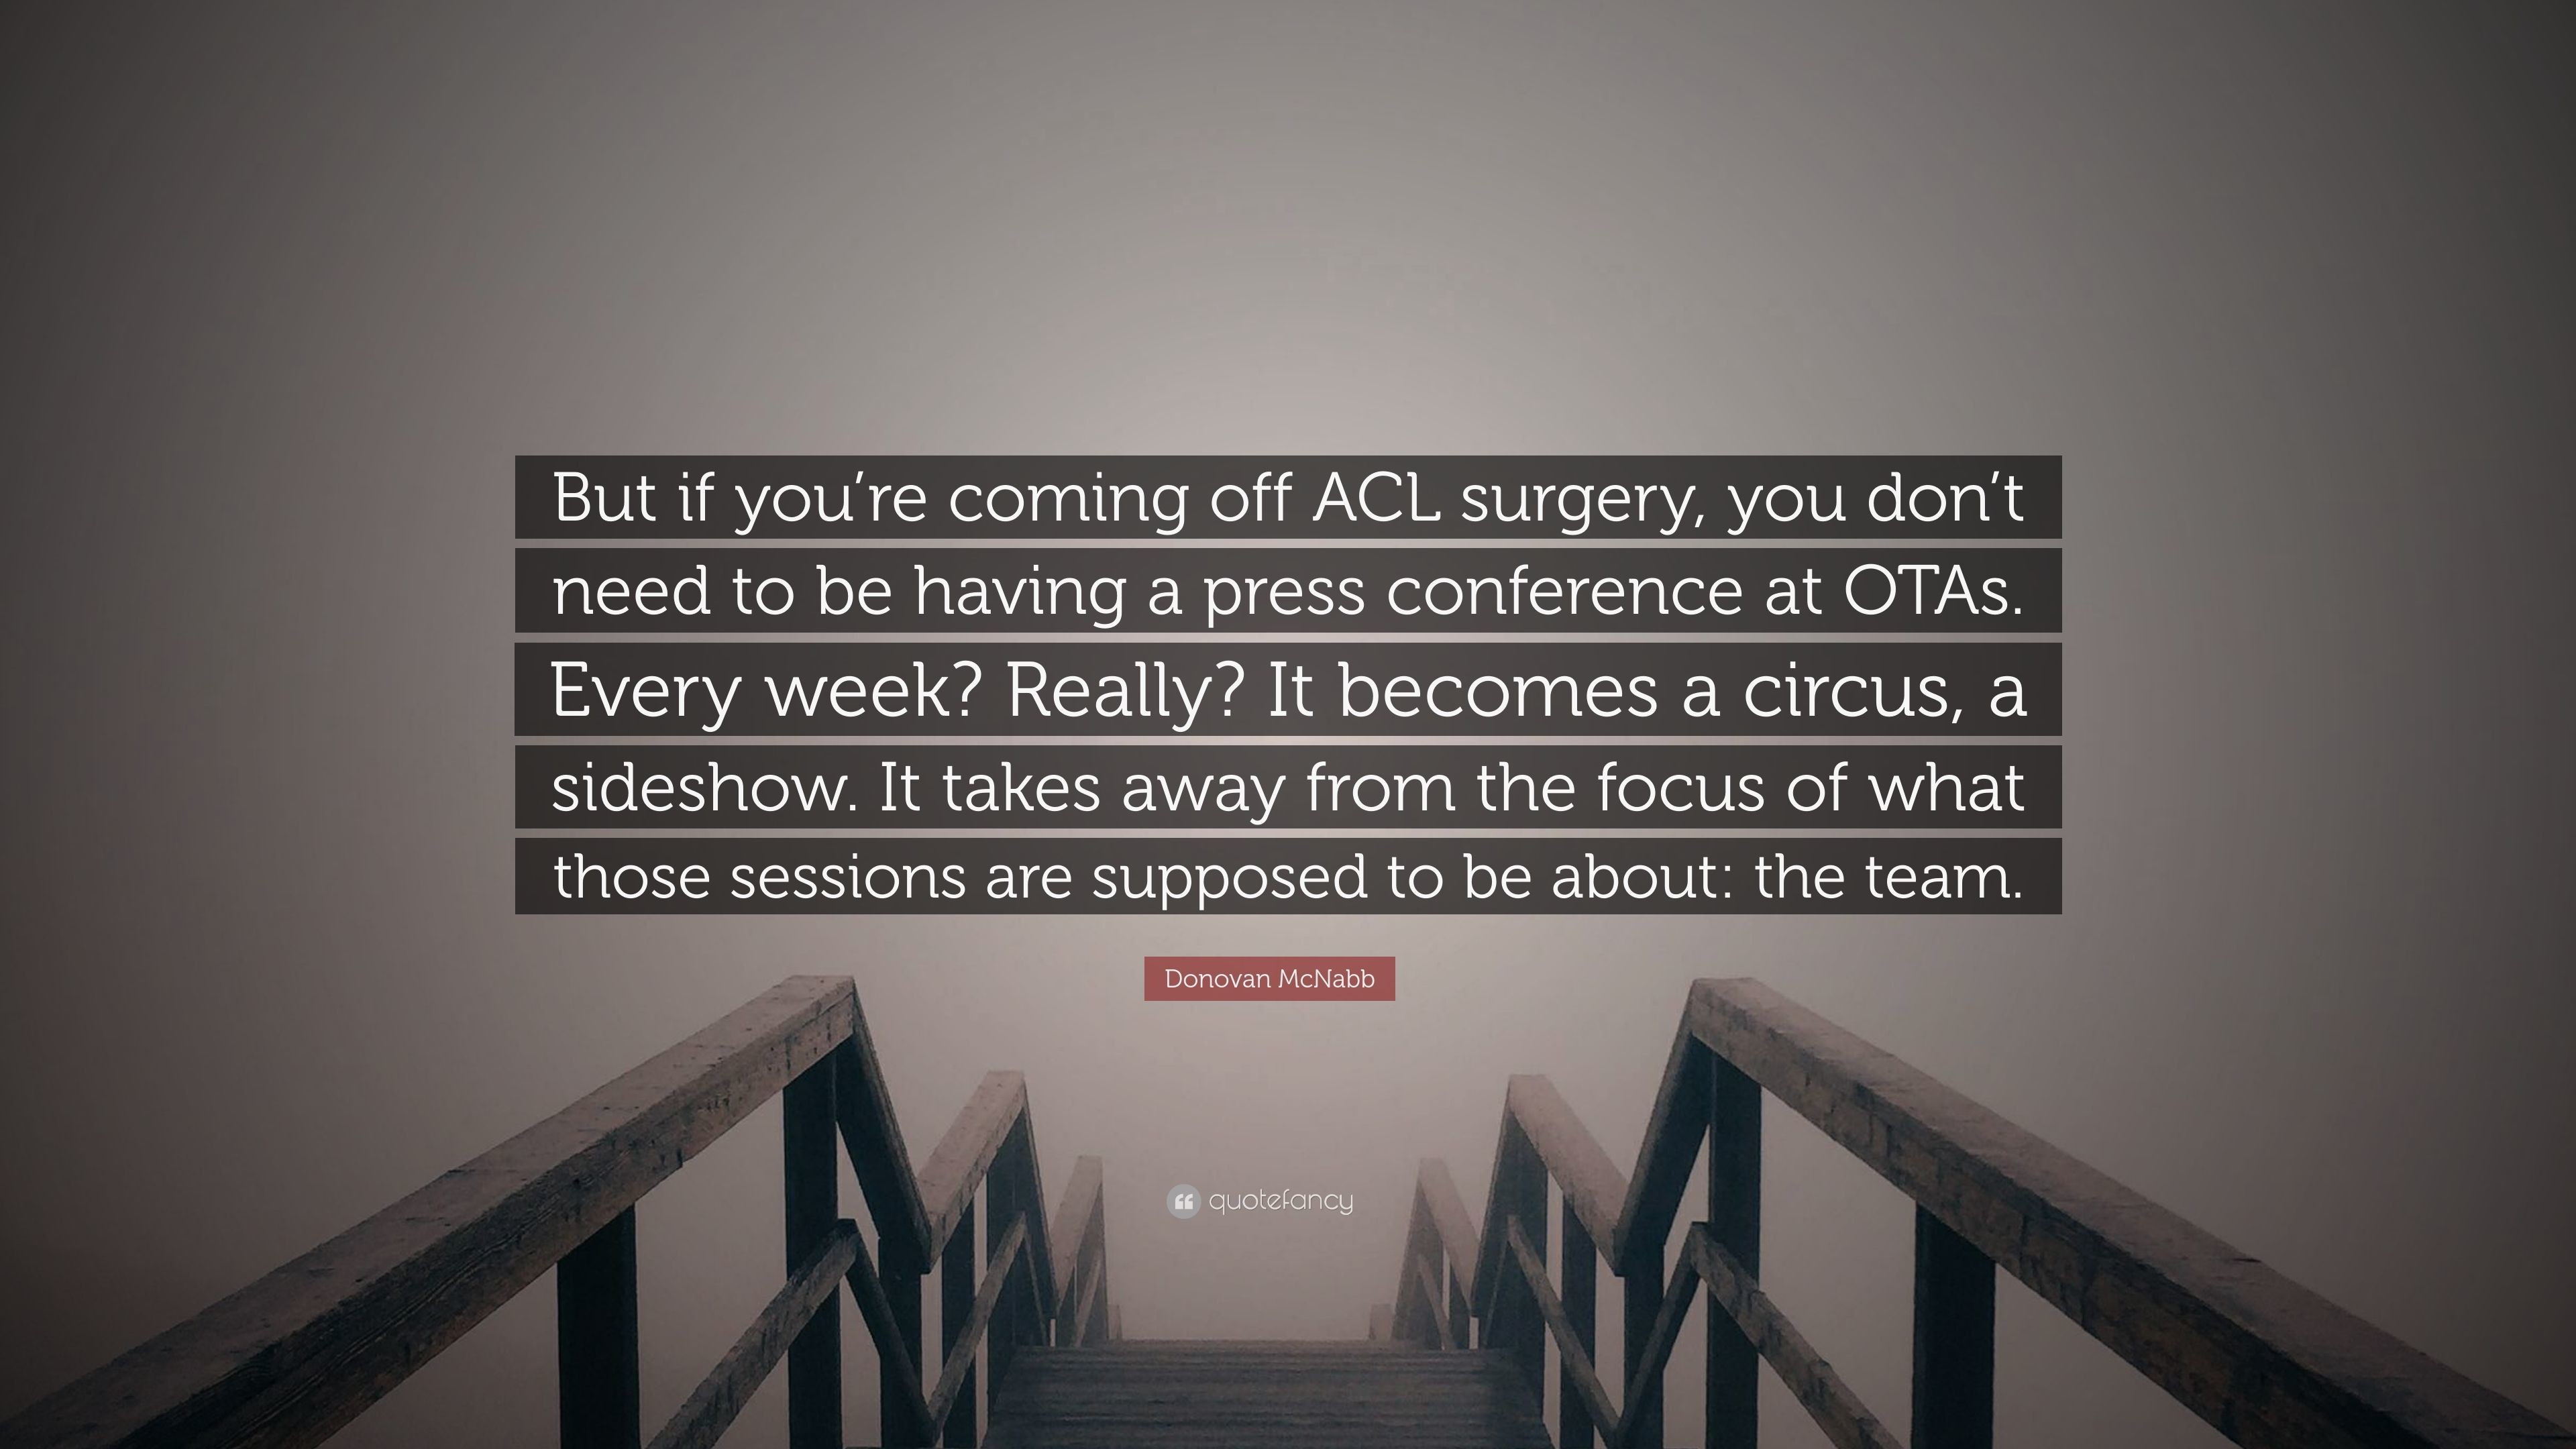 3840x2160 Donovan McNabb Quote: “But if you're coming off ACL surgery, you